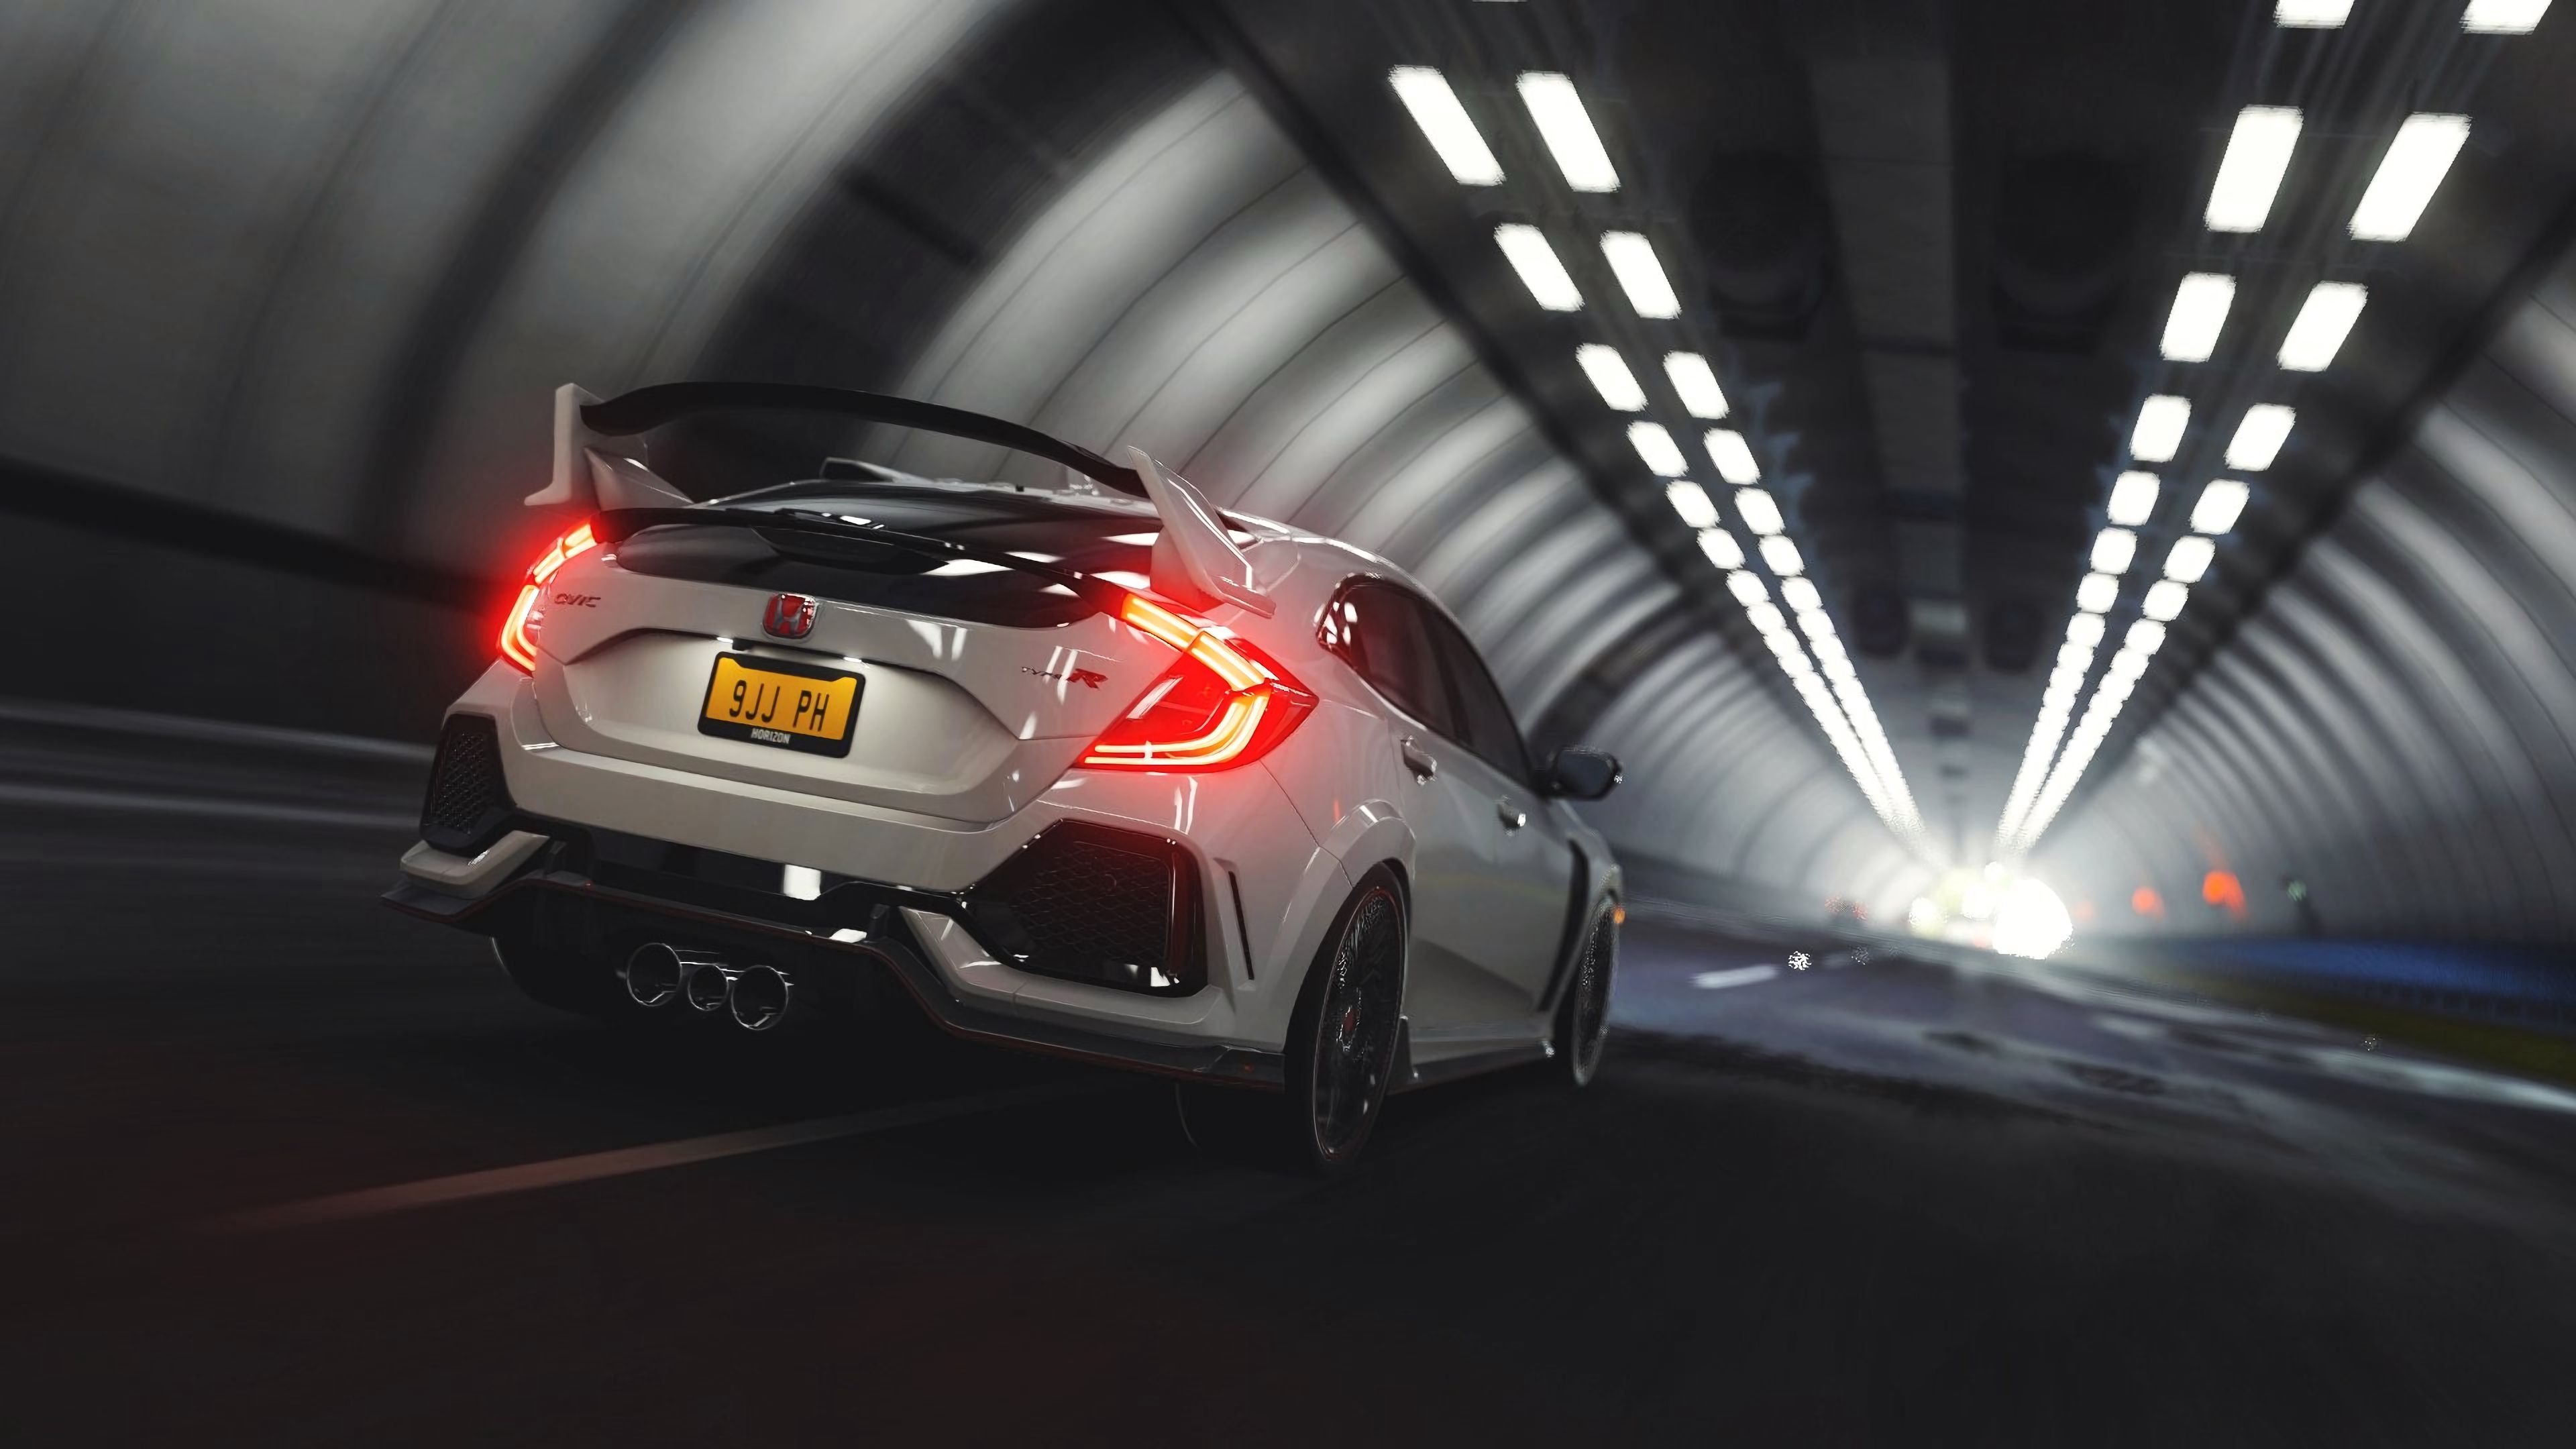 150858 download wallpaper honda, cars, tunnel, race, honda type r, honda civic type r screensavers and pictures for free